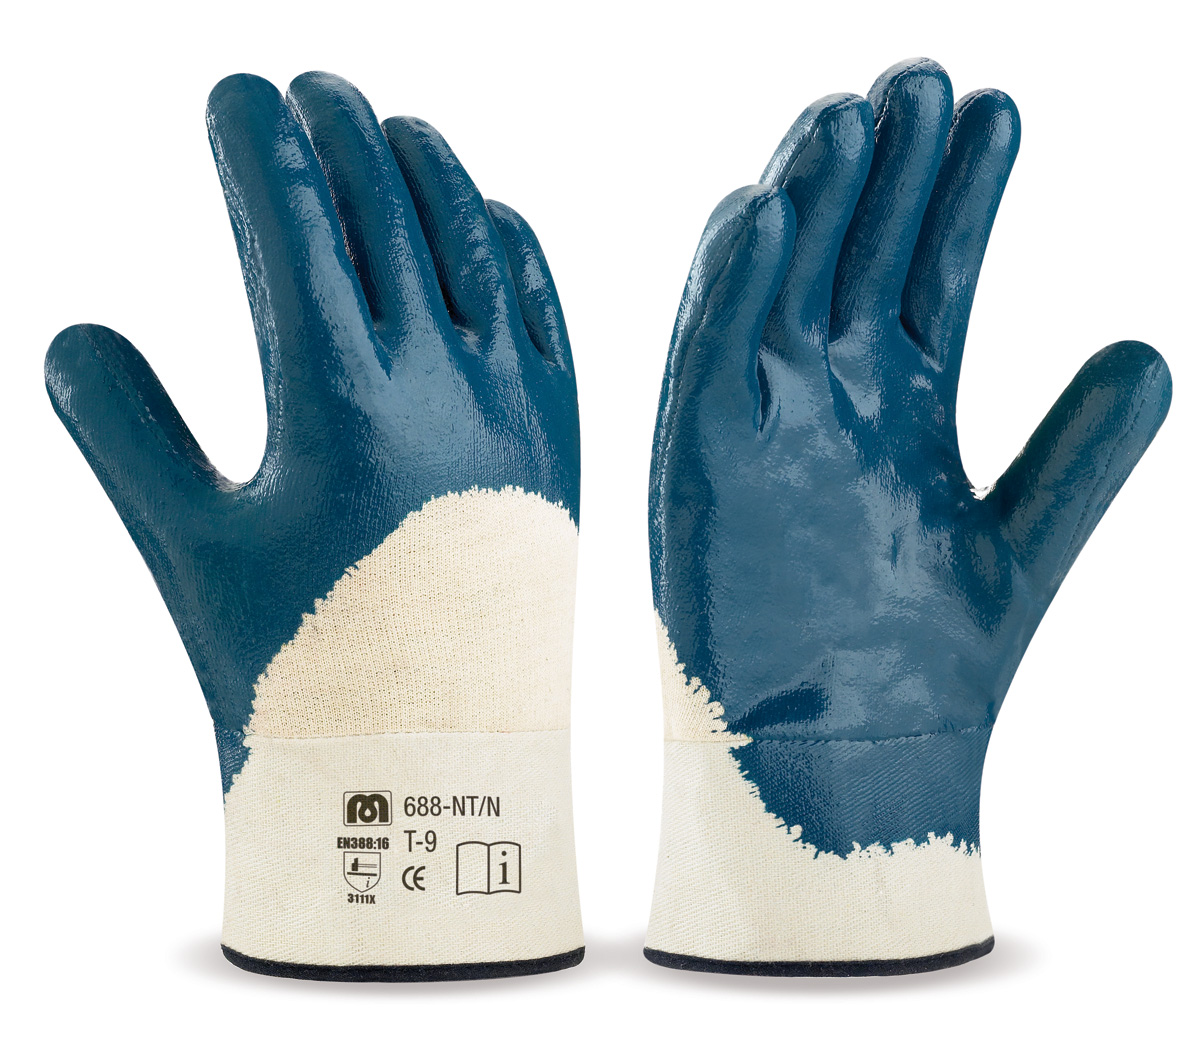 688-NT/N Work Gloves Nitrile With Support  Breathable back. Flexible Nitrile Glove with cotton support, rigid sleeve and inner lining.
